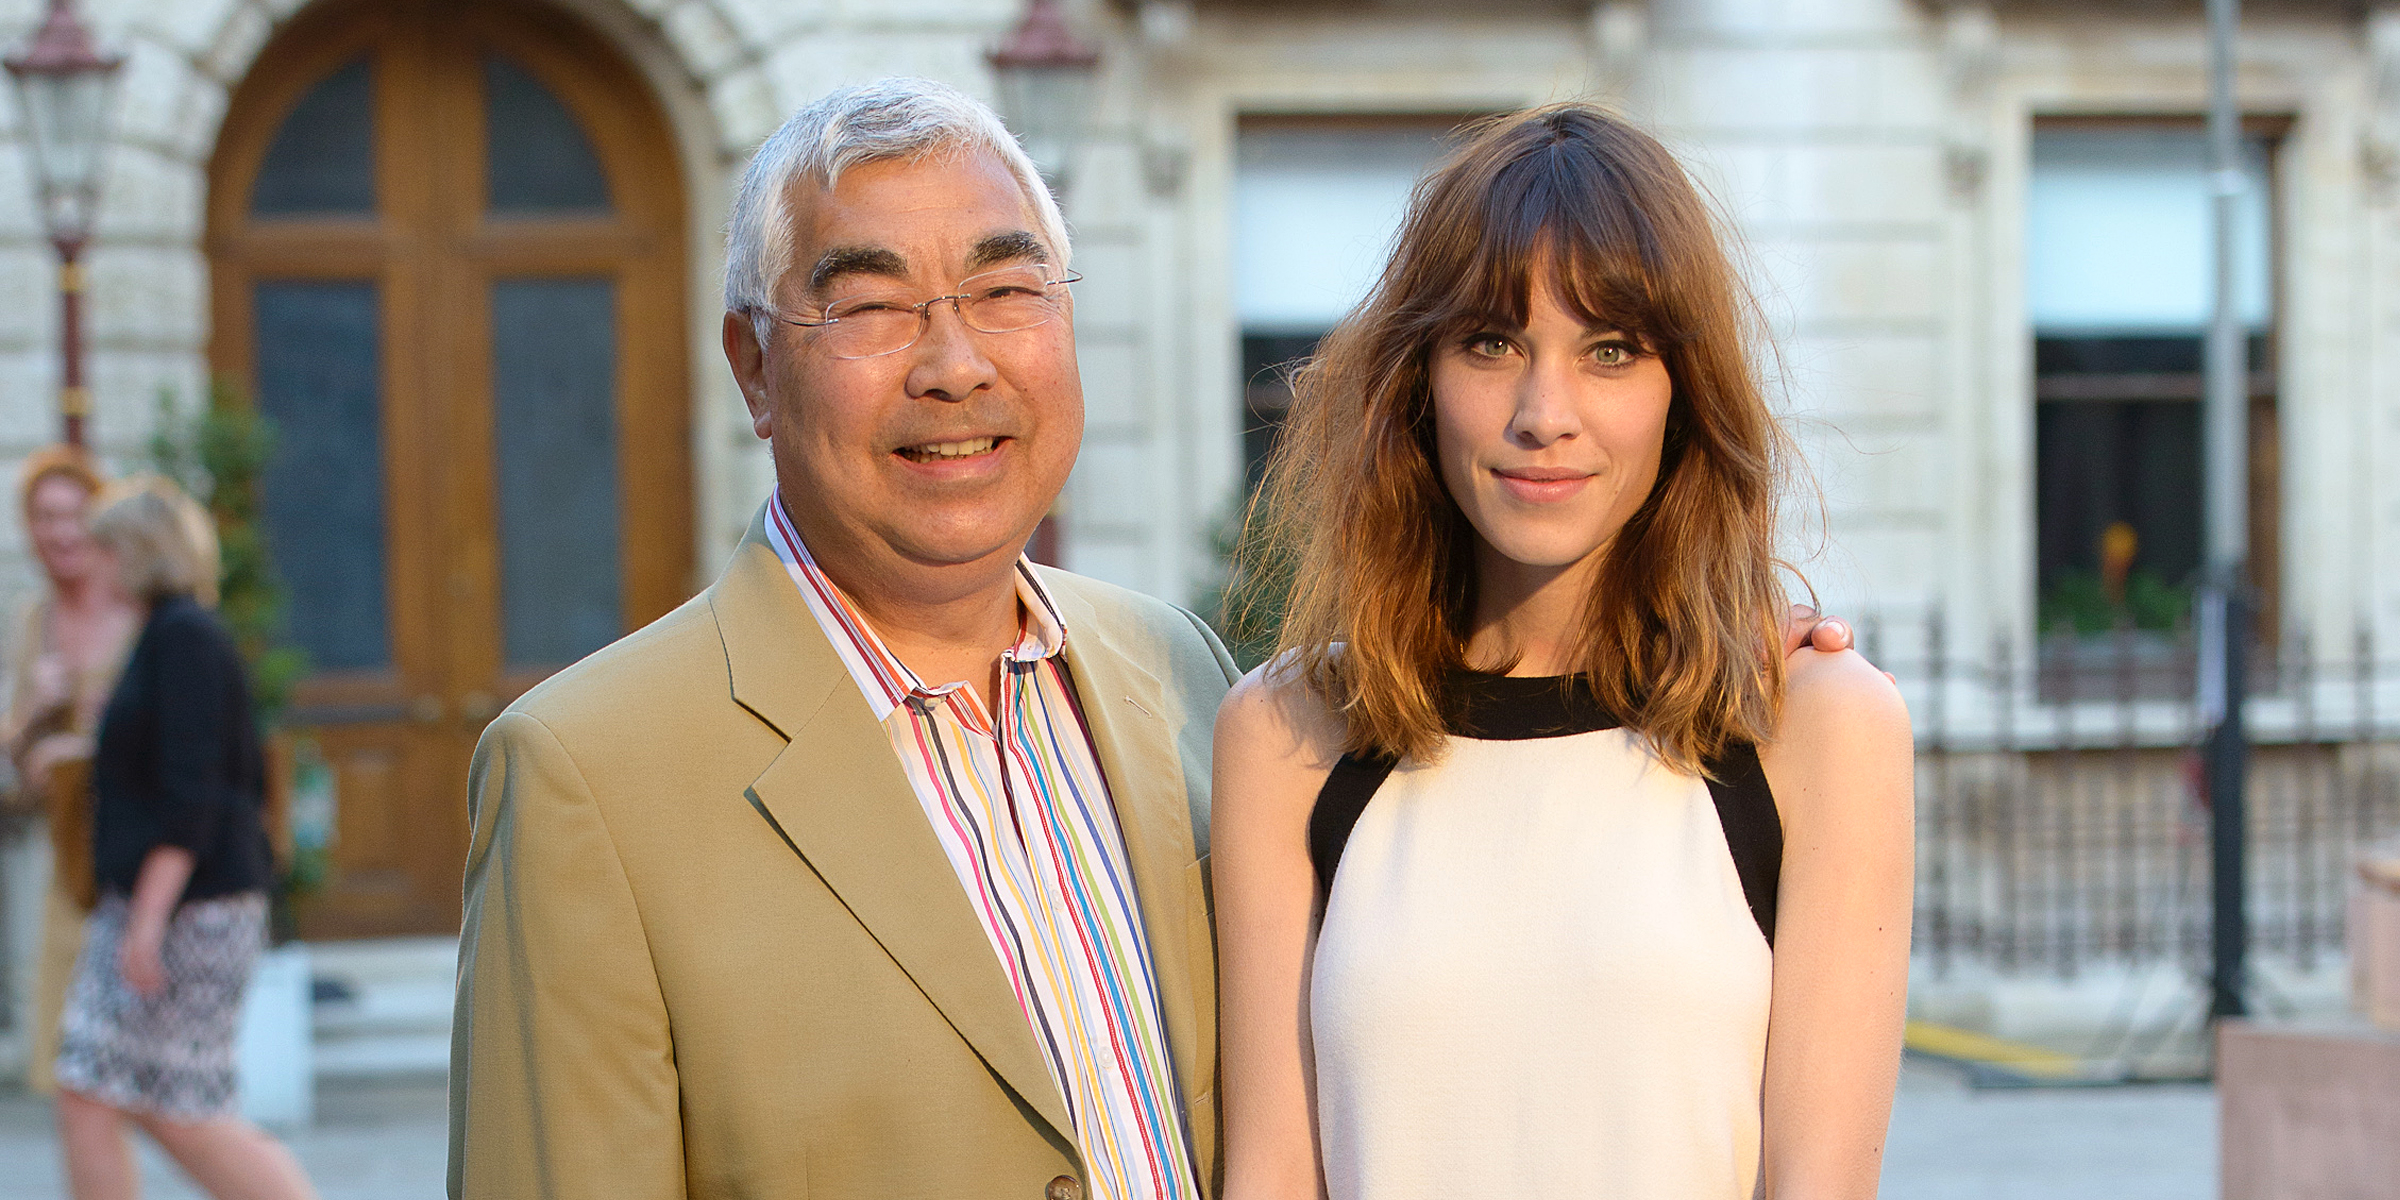 Philip Chung et Alexa Chung | Source : Getty Images